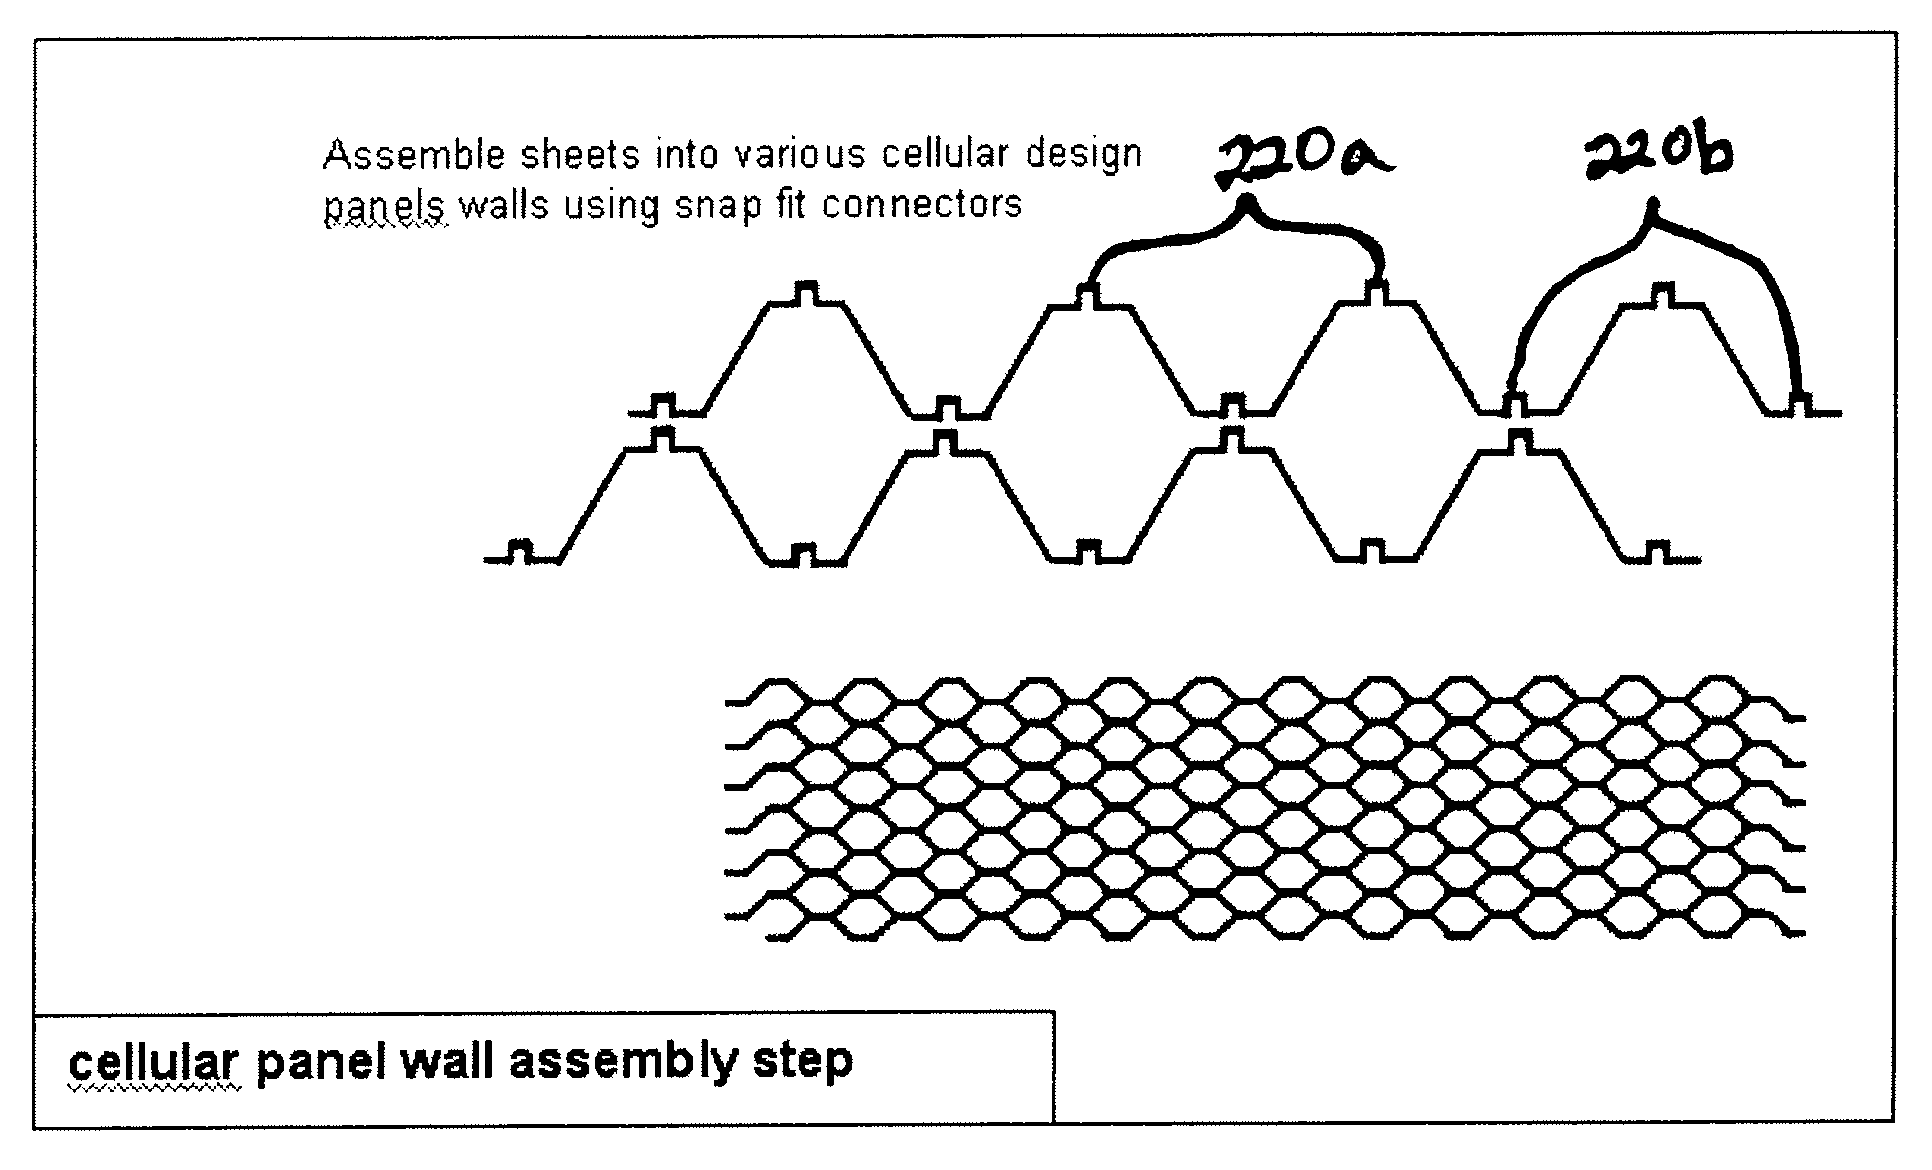 Multilayered cellular metallic glass structures and methods of preparing the same